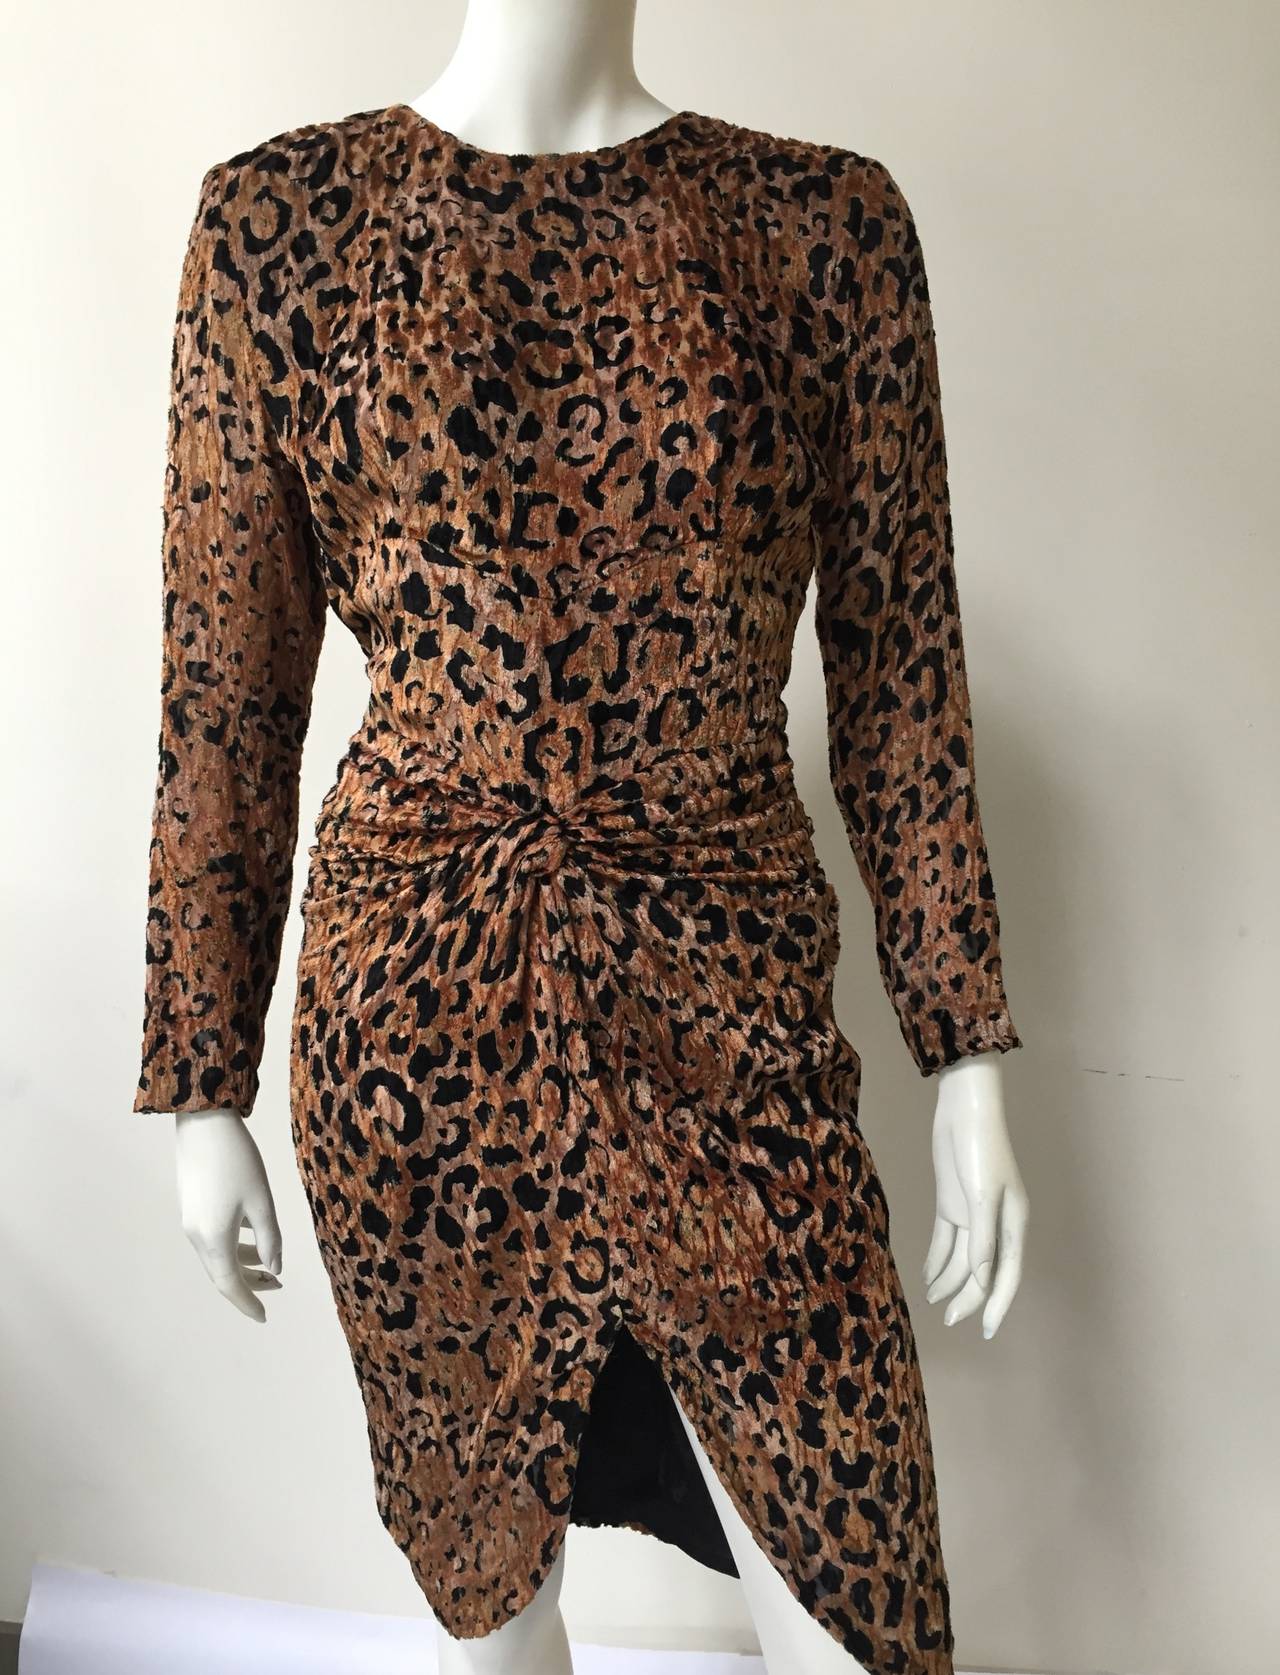 Vicky Tiel 80s for Bergdorf Goodman cheetah velvet print dress size 6 made in France. Ruching at all around waistline makes this one sexy dress.  Can't you see Morgan Fairchild wearing this? Dress is lined with waist band interior that holds the